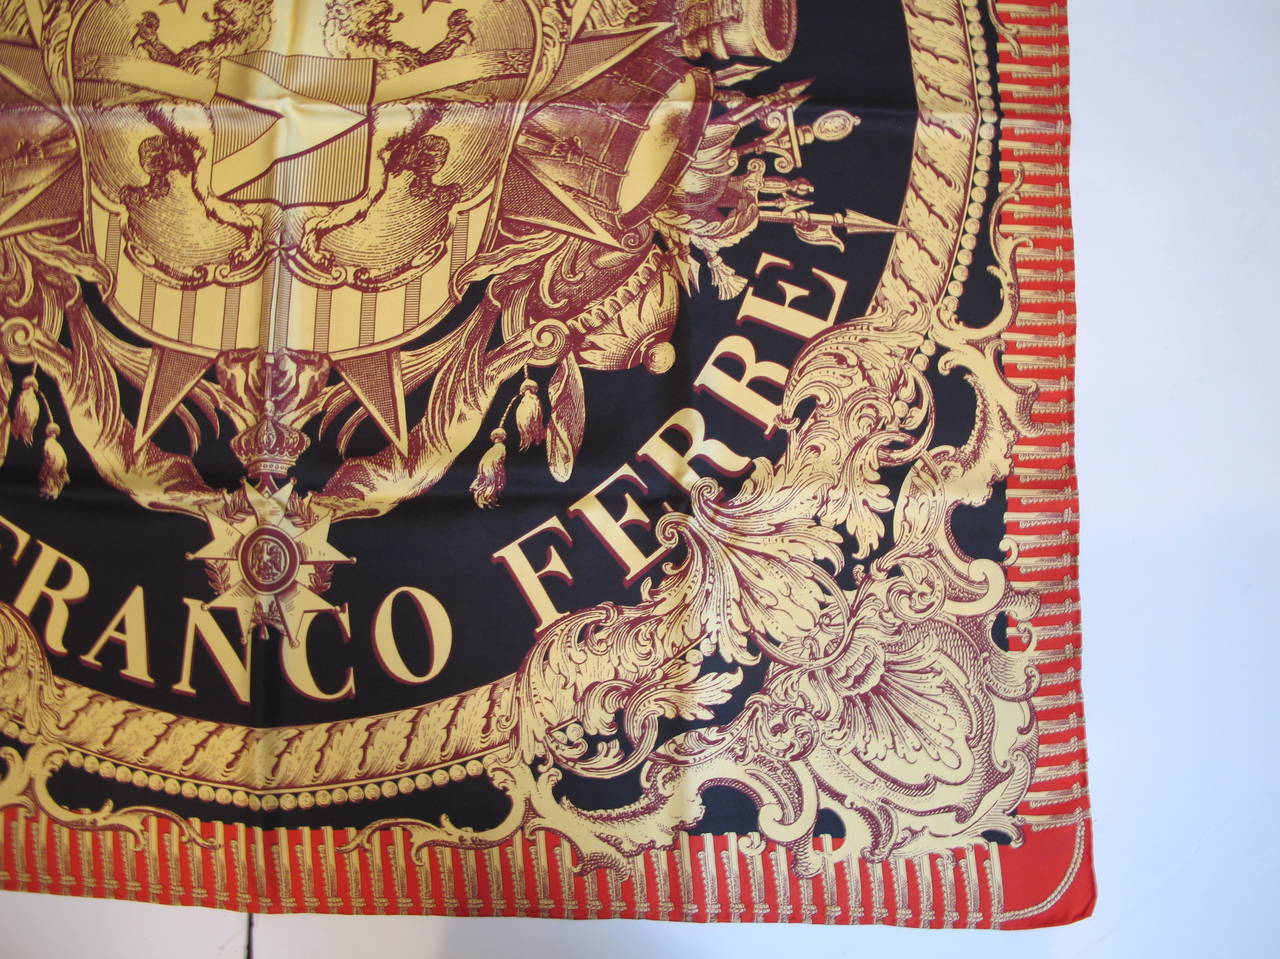 Gianfranco Ferre silk scarf with rolled hem created when he was at the height of his career. The majestic crown motif is protected by ferocious lions. The fantastical emblematic realm is brought to life via its colors of black, rich red and precious